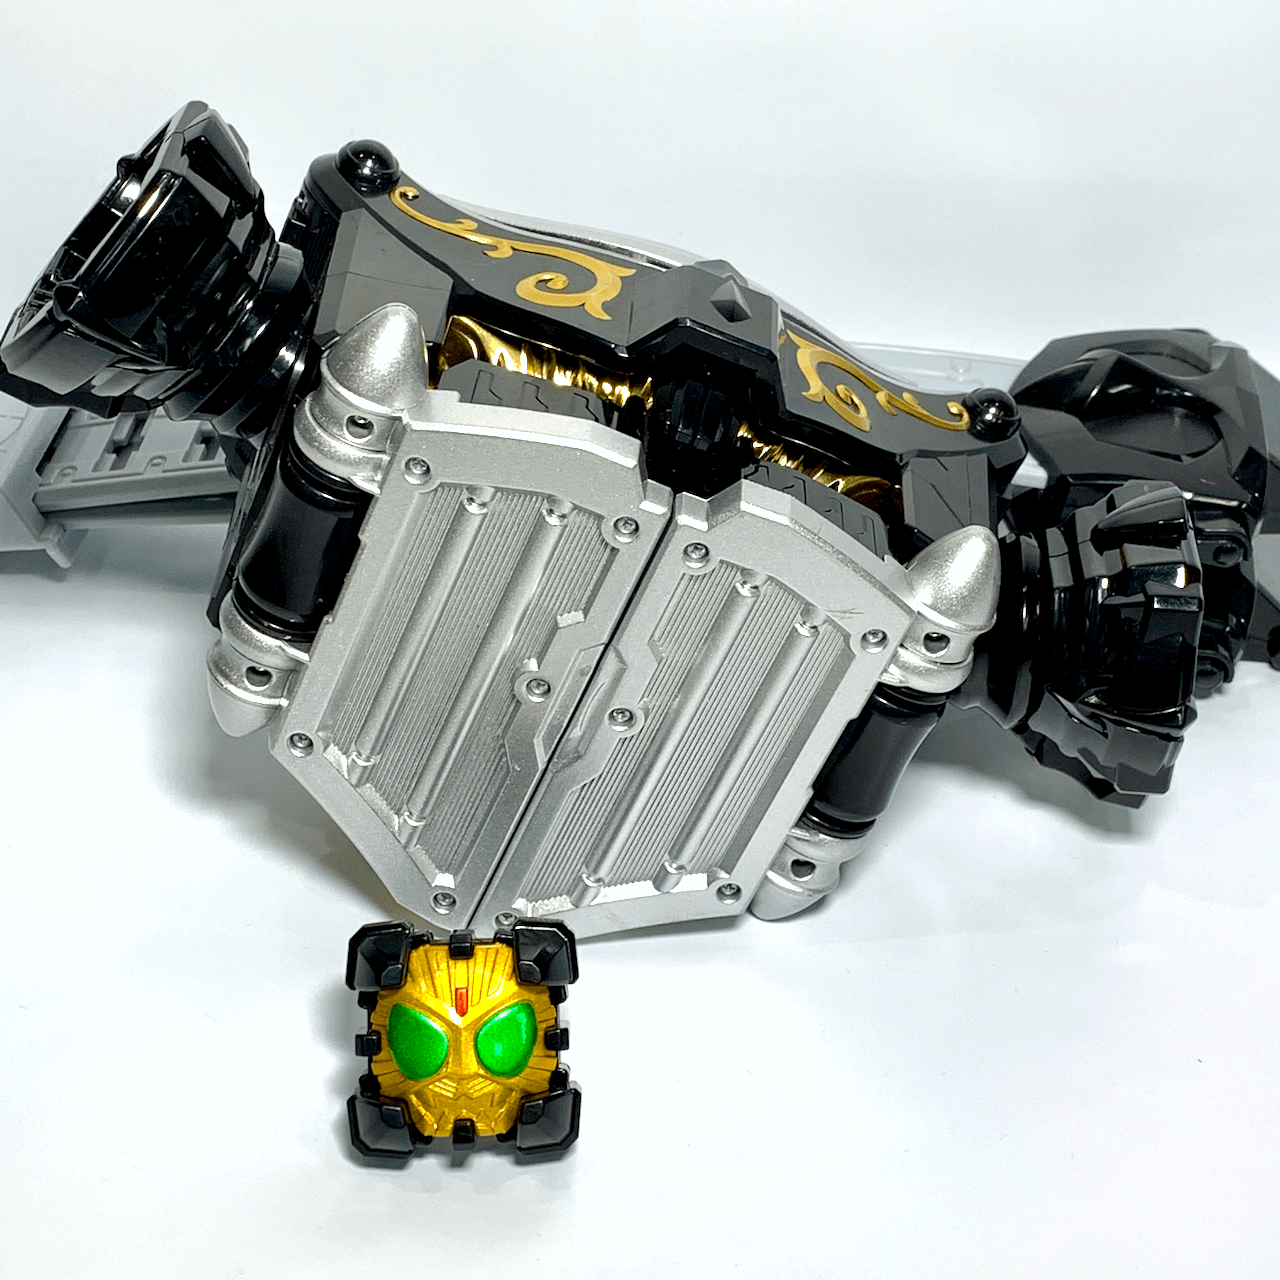 [LOOSE] Kamen Rider Wizard: DX Beast Driver with Extra Beast Rings | CSTOYS INTERNATIONAL